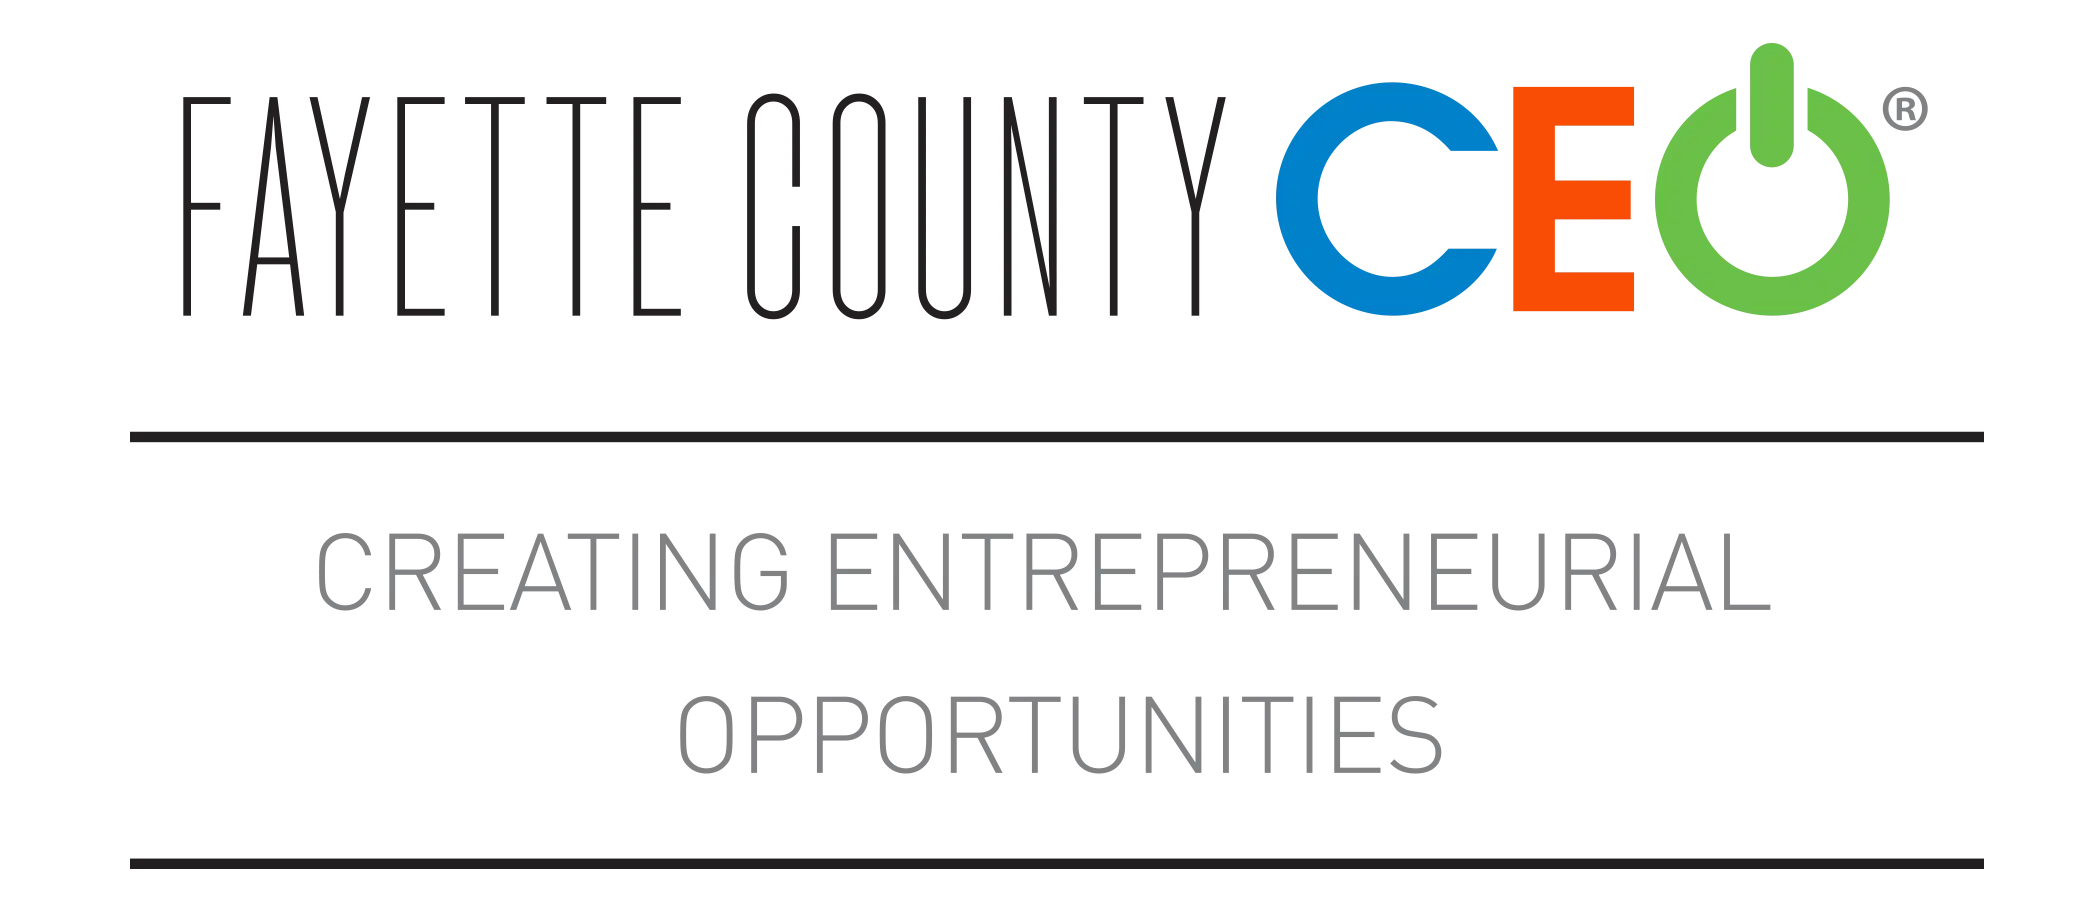 The first CEO Class for Fayette County is set to go in the Fall 